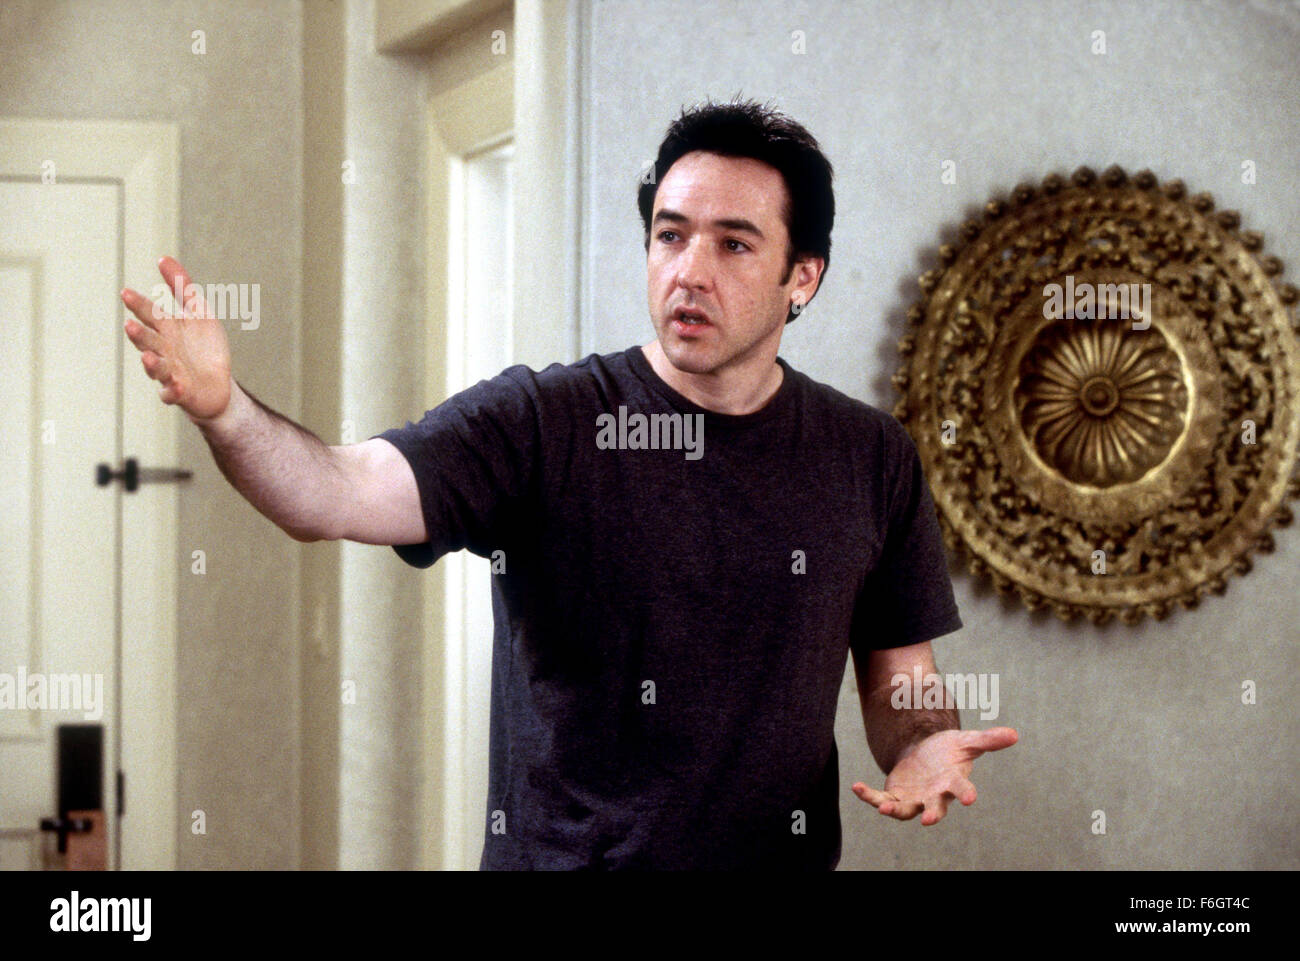 Feb 08, 2001; Hollywood, CA, USA; JOHN CUSACK stars as Eddie Thomas, a famous movie star who falls in love with his wifes sister in the romantic comedy 'America's Sweethearts' directed by Joe Roth. Stock Photo